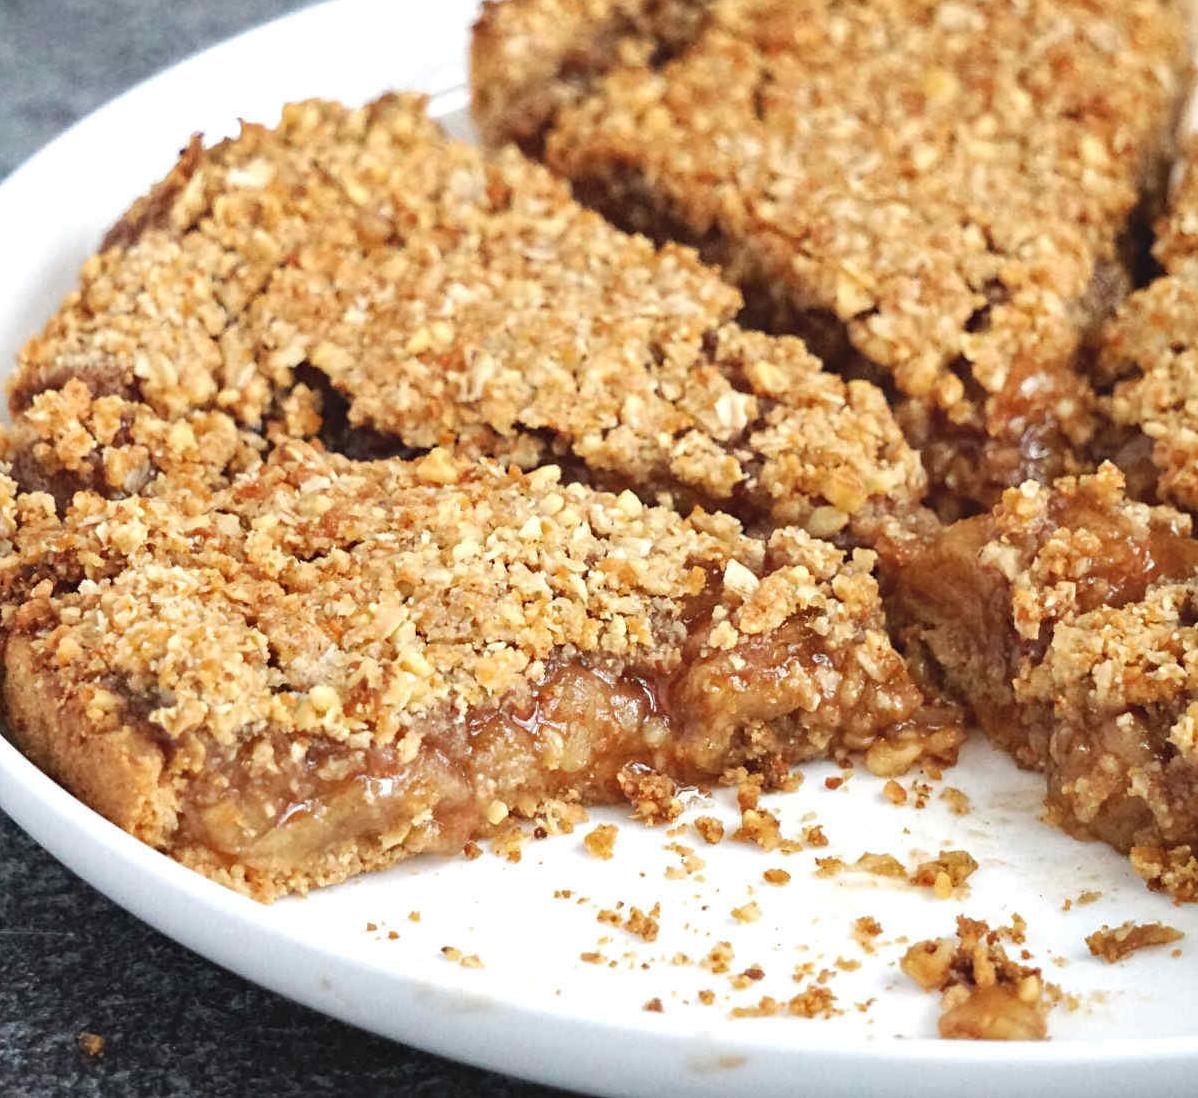  Crispy sweet crumble topping over perfectly spiced apples gives this pie its irresistible crunch